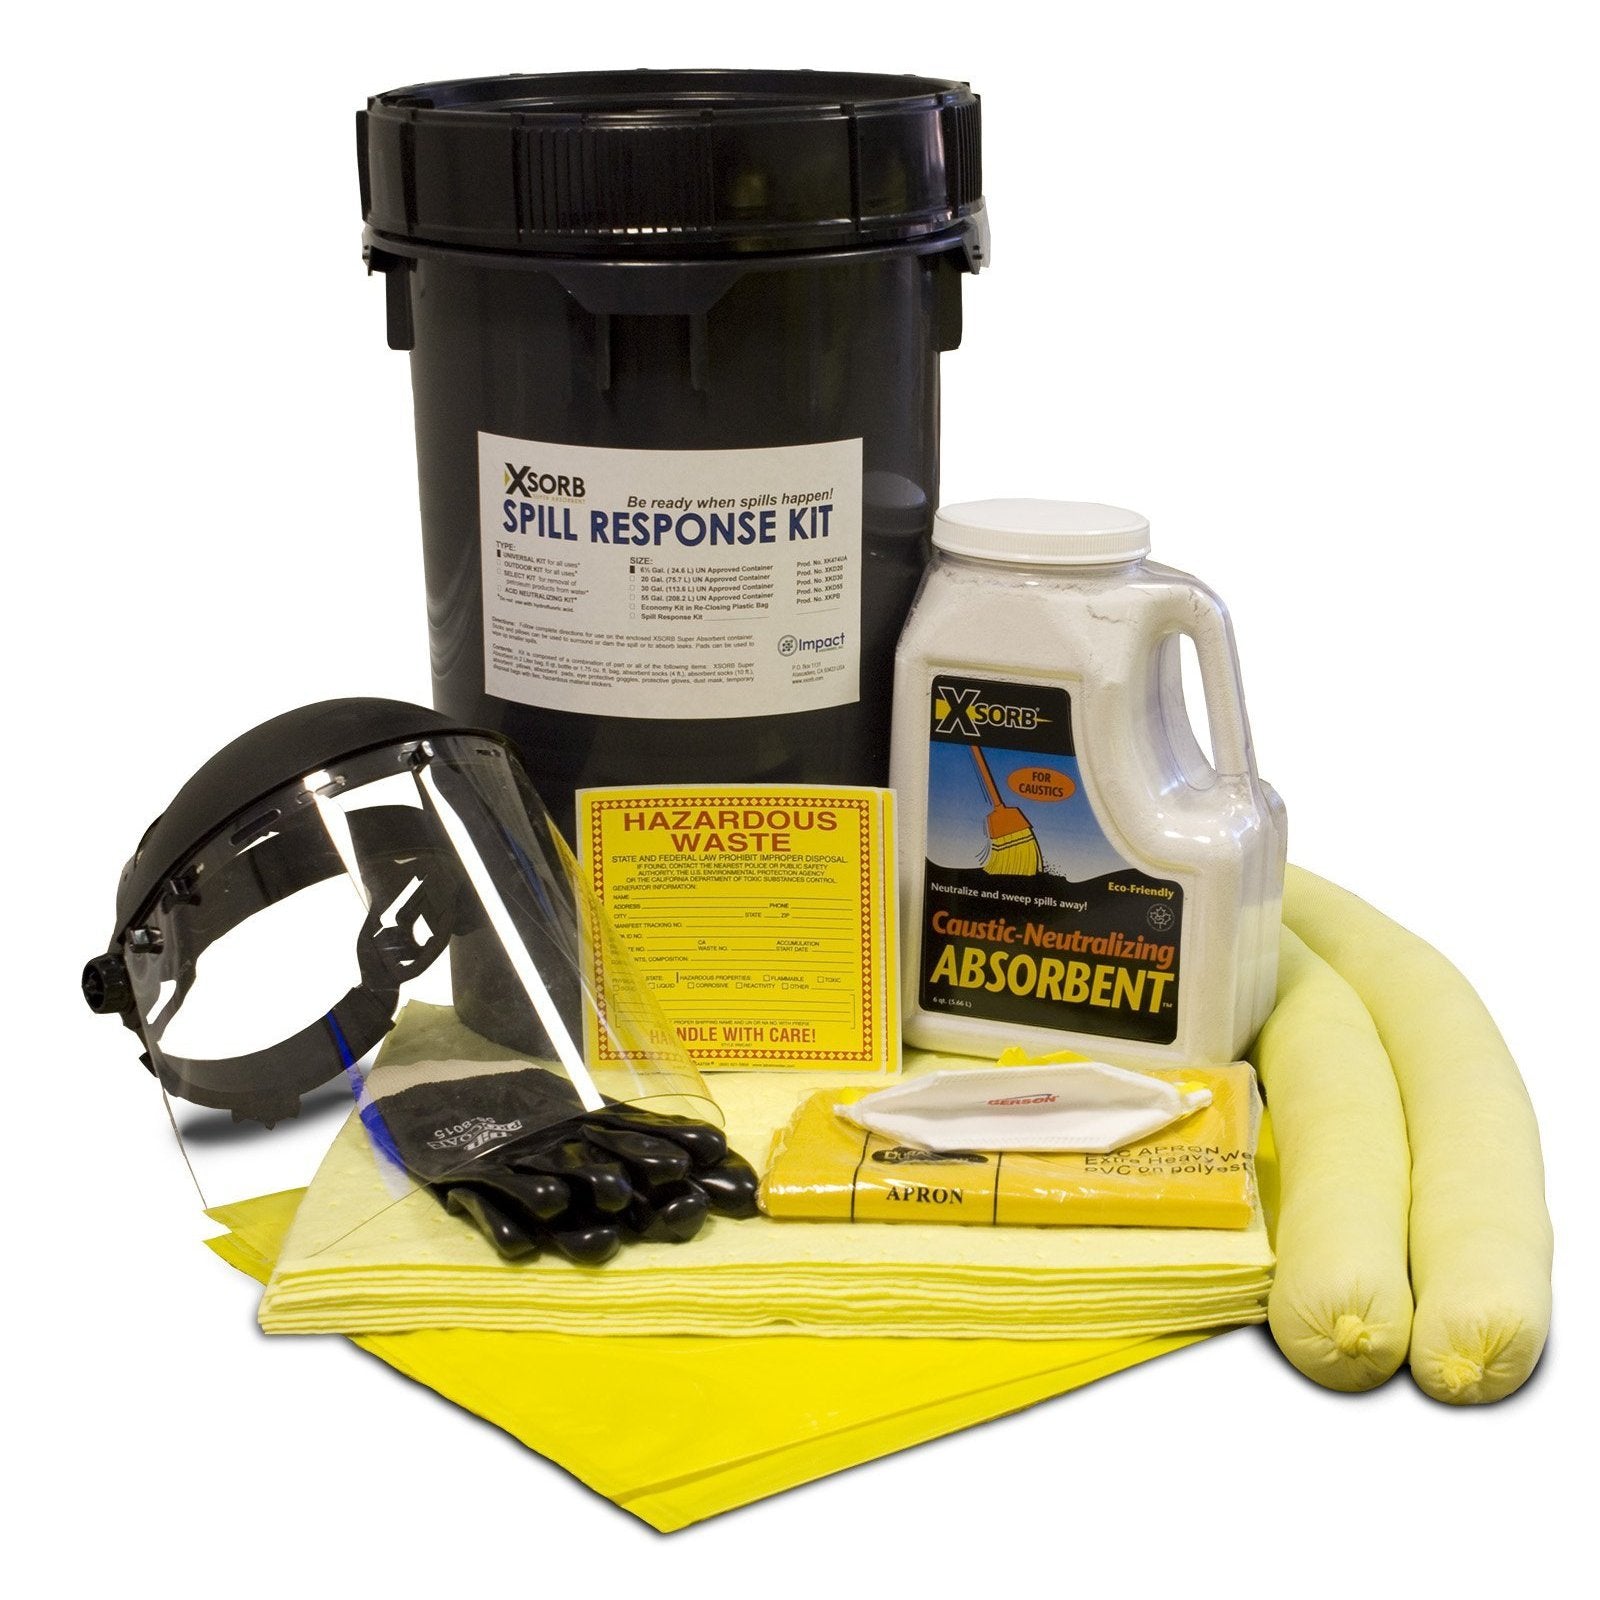 XSORB Caustic Neutralizer 6.5 gal Spill Kit - 1 PAIL-eSafety Supplies, Inc